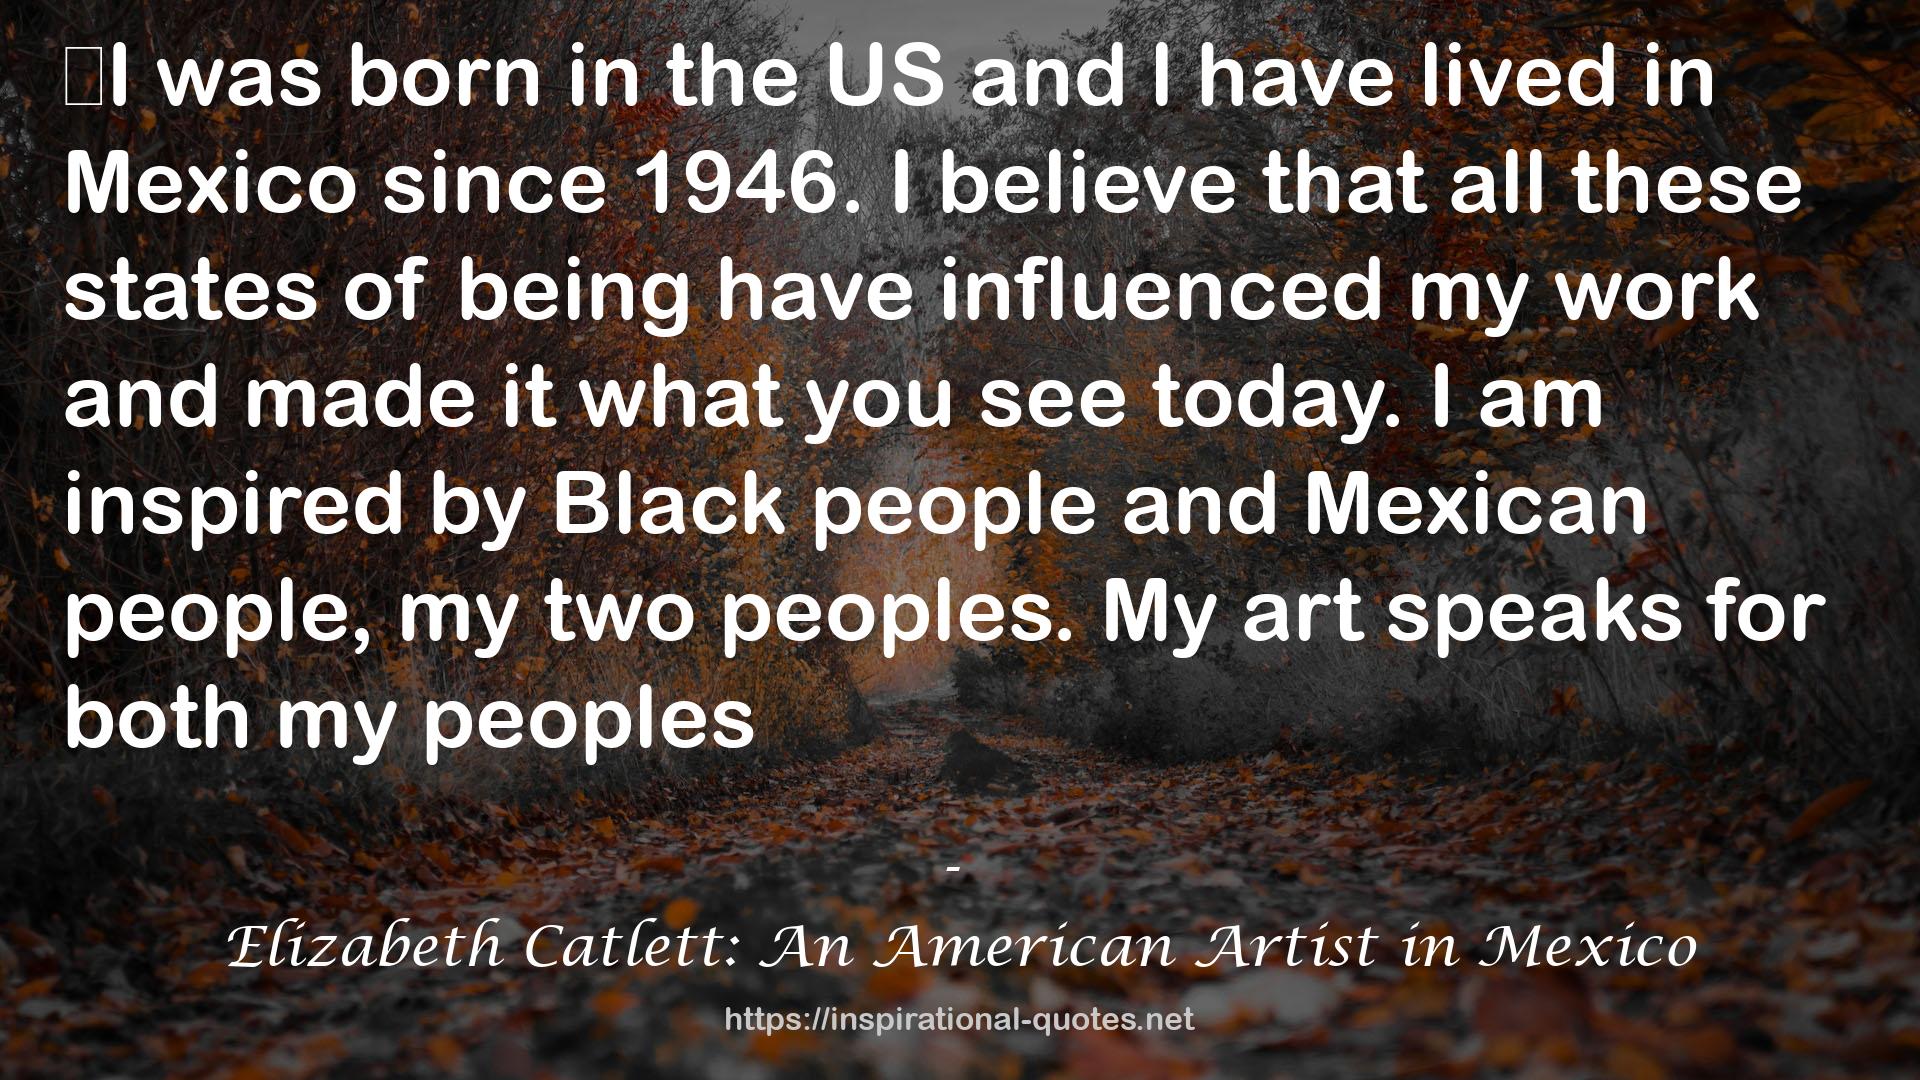 Elizabeth Catlett: An American Artist in Mexico QUOTES